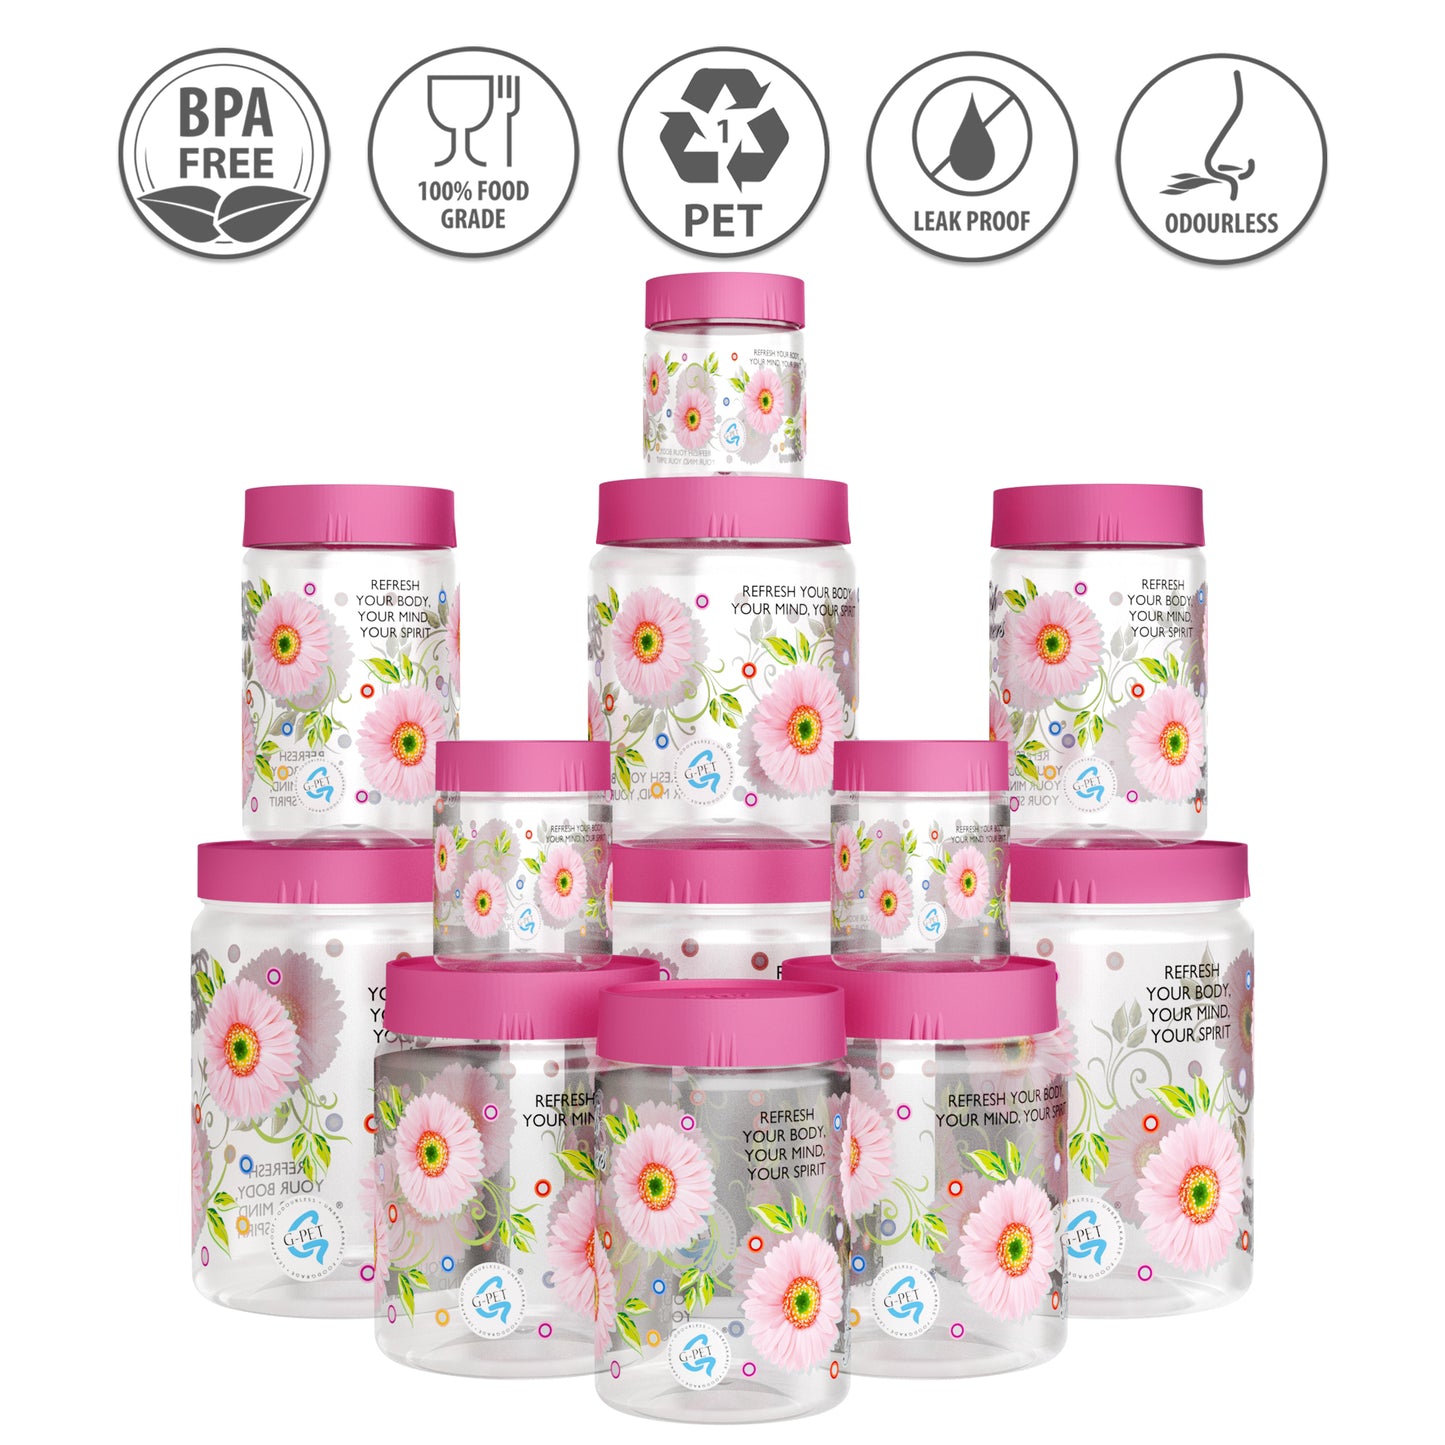 Print Magic Container Pink Pack of 12 - 2000ml (3 pcs), 1000ml (3 pcs), 750ml (3 pcs), 200ml (3 pcs) Plastic Grocery Container